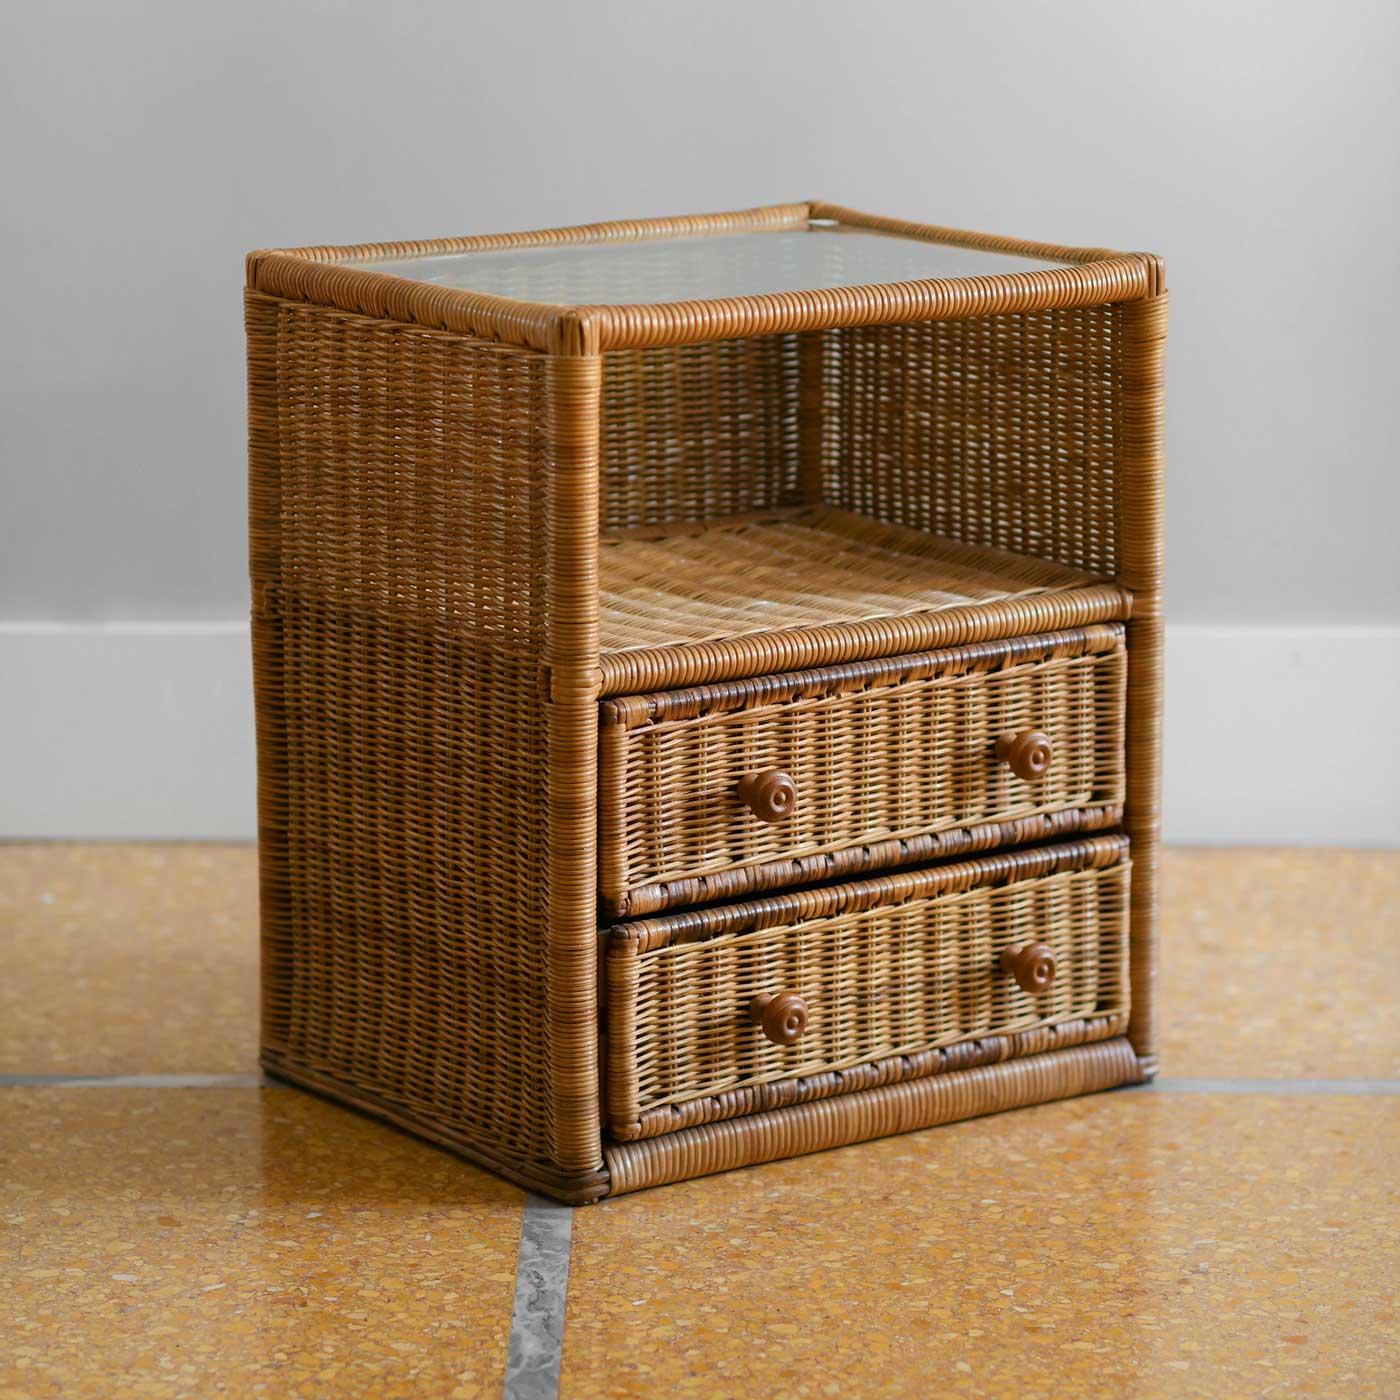 Late 20th Century “Vivai del Sud” Bamboo Bedside Tables with Drawers and Glass Top 'Set of 2'